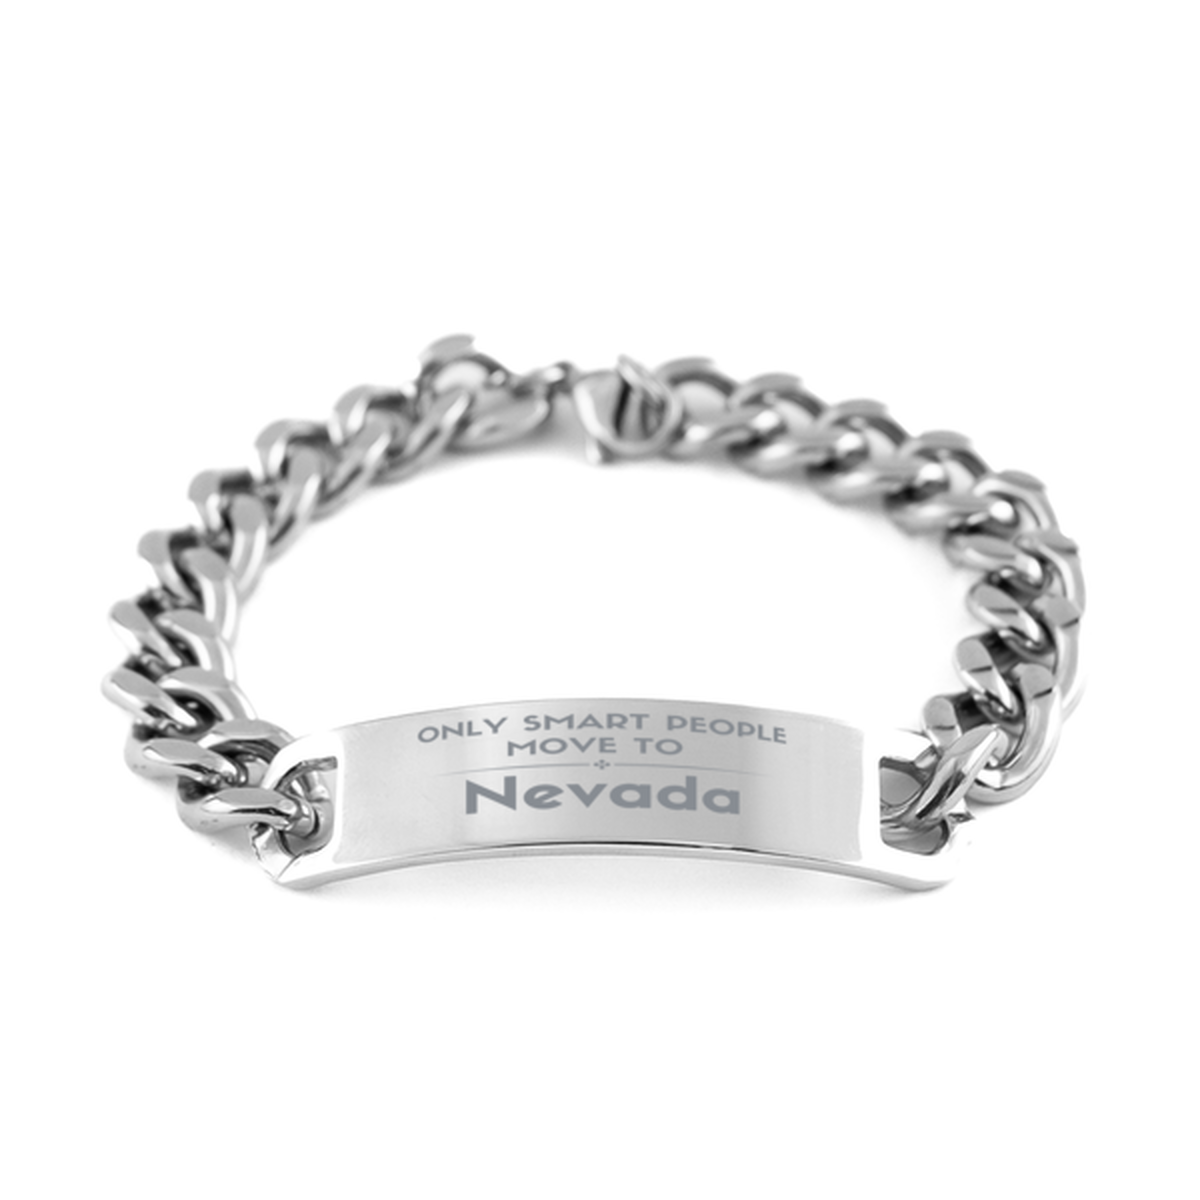 Only smart people move to Nevada Cuban Chain Stainless Steel Bracelet, Gag Gifts For Nevada, Move to Nevada Gifts for Friends Coworker Funny Saying Quote